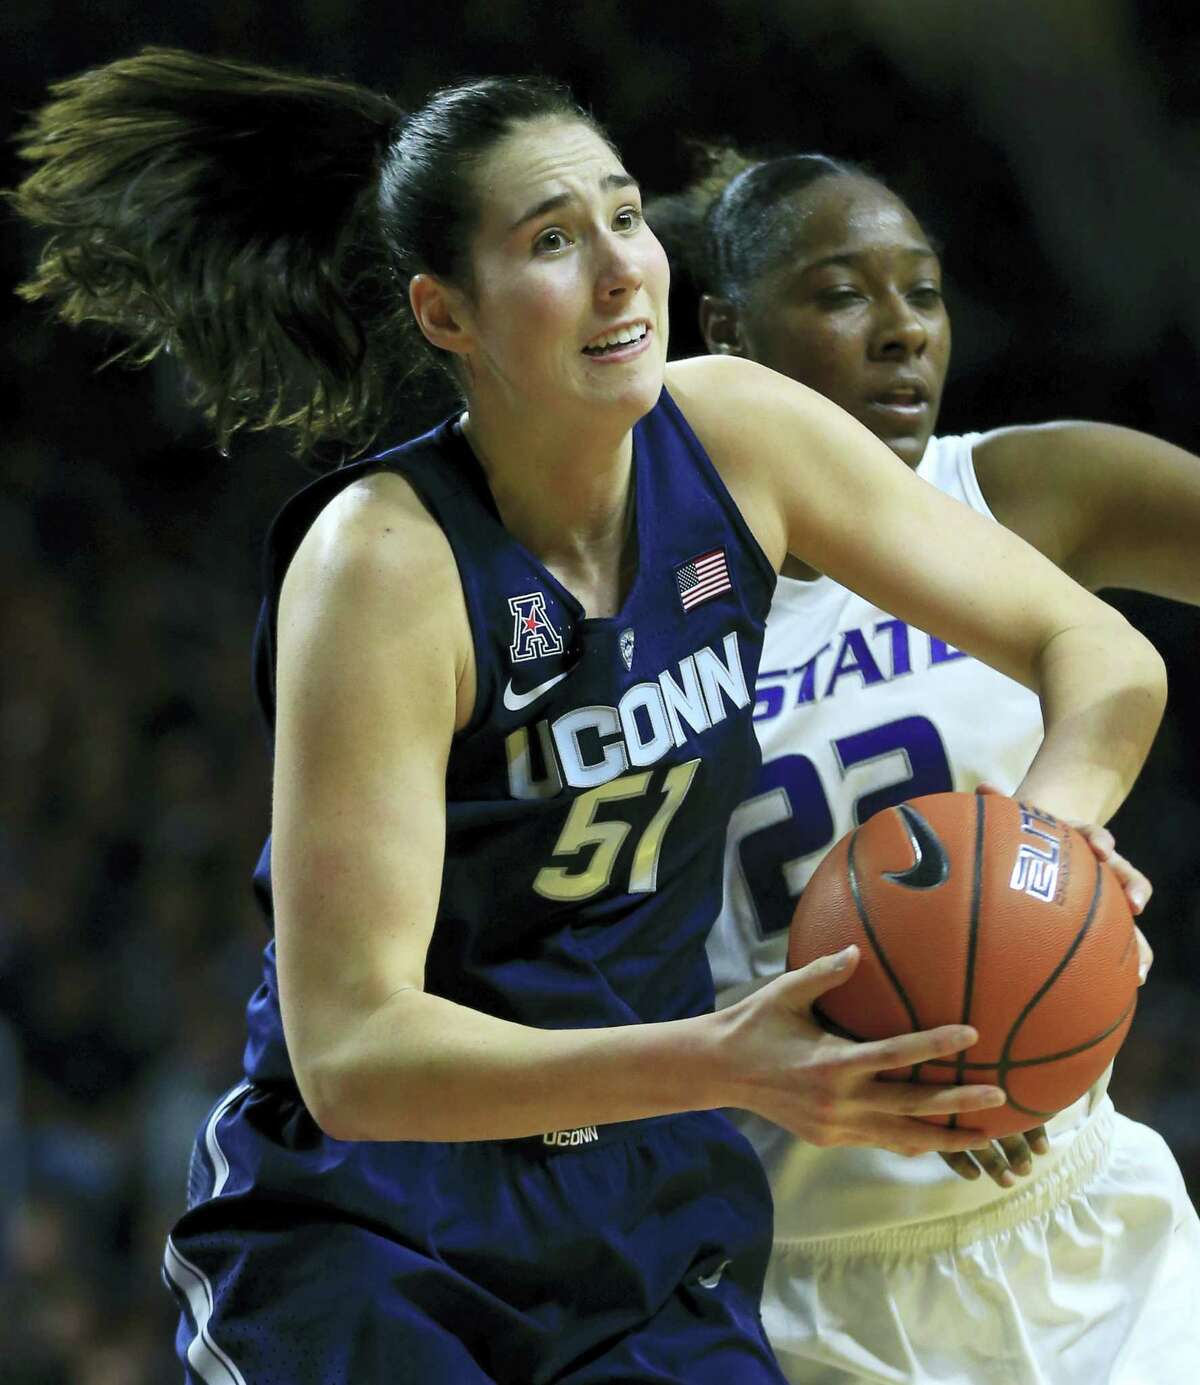 Connecticut center Natalie Butler (51) rebounds in front of Kansas State forward Breanna Lewis (22) during the first half of an NCAA college basketball game in Manhattan, Kan. on Sunday, Dec. 11, 2016.